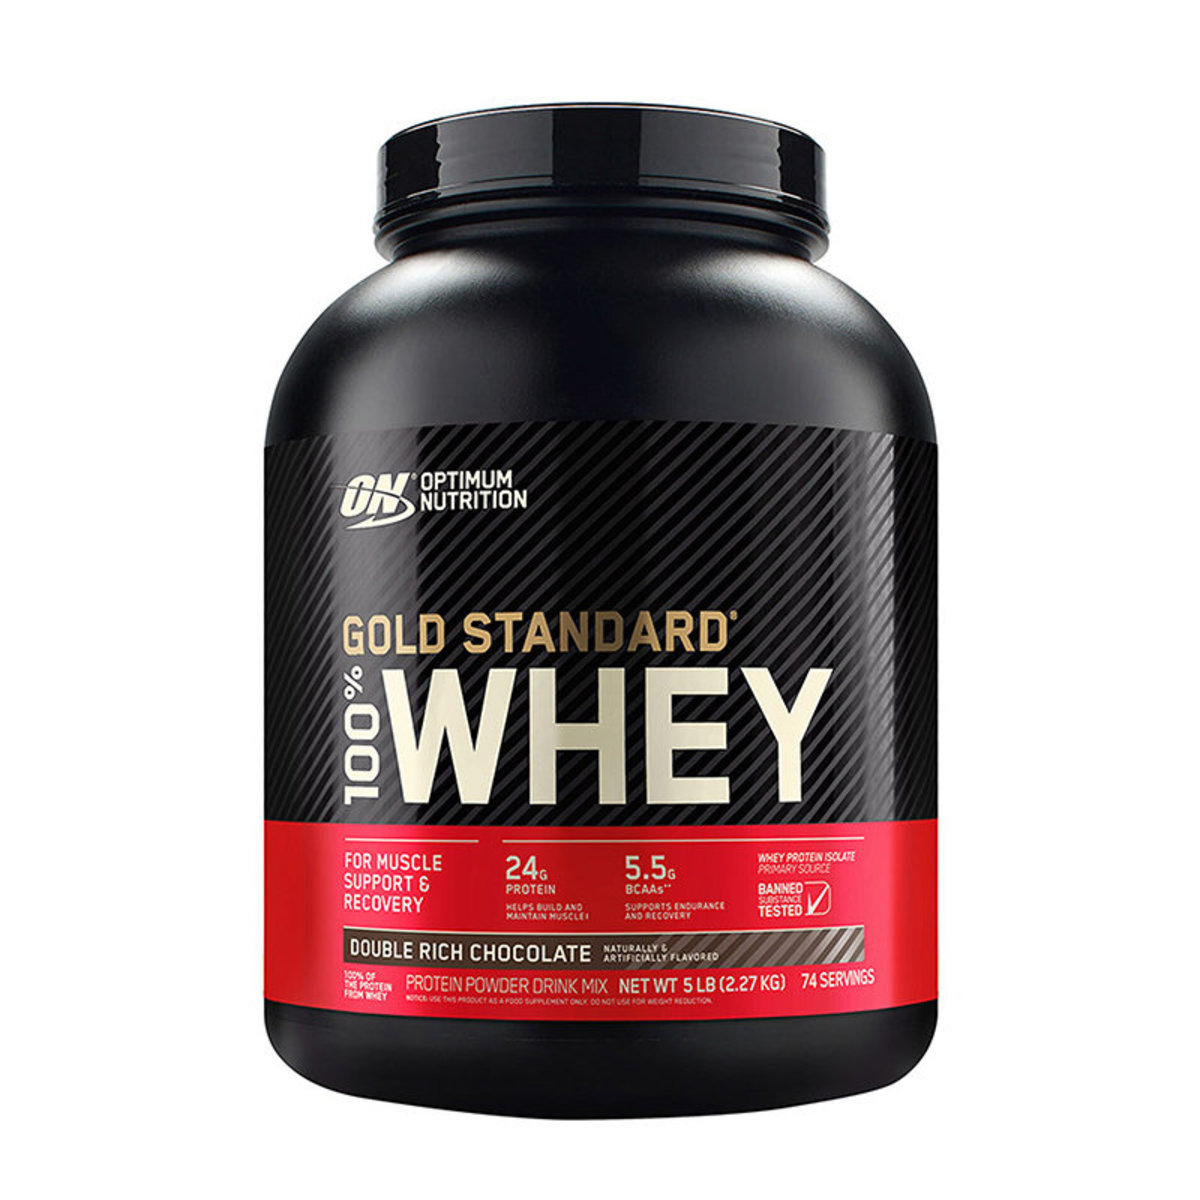 Gold Standard Whey 5lbs - Double Rich Chocolate